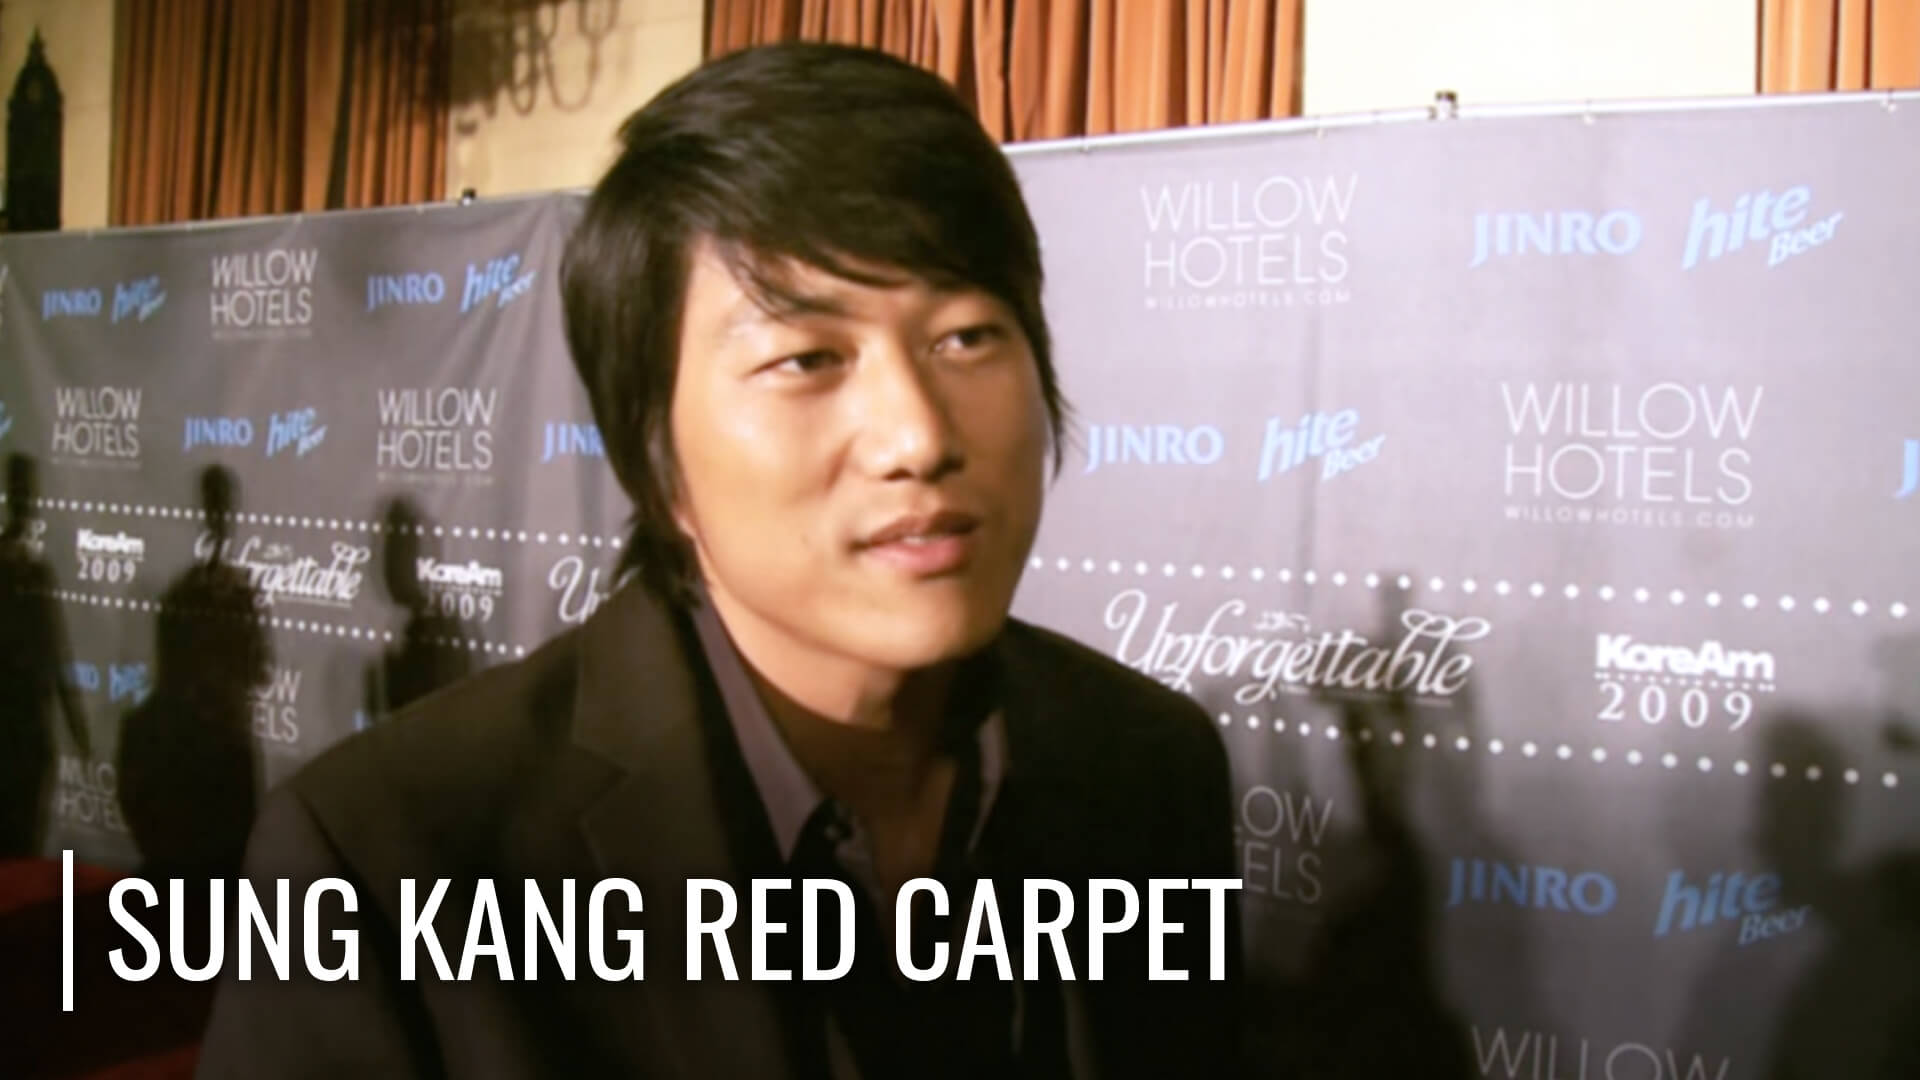 Sung Kang on the Red Carpet of 2009 Unforgettable Gala